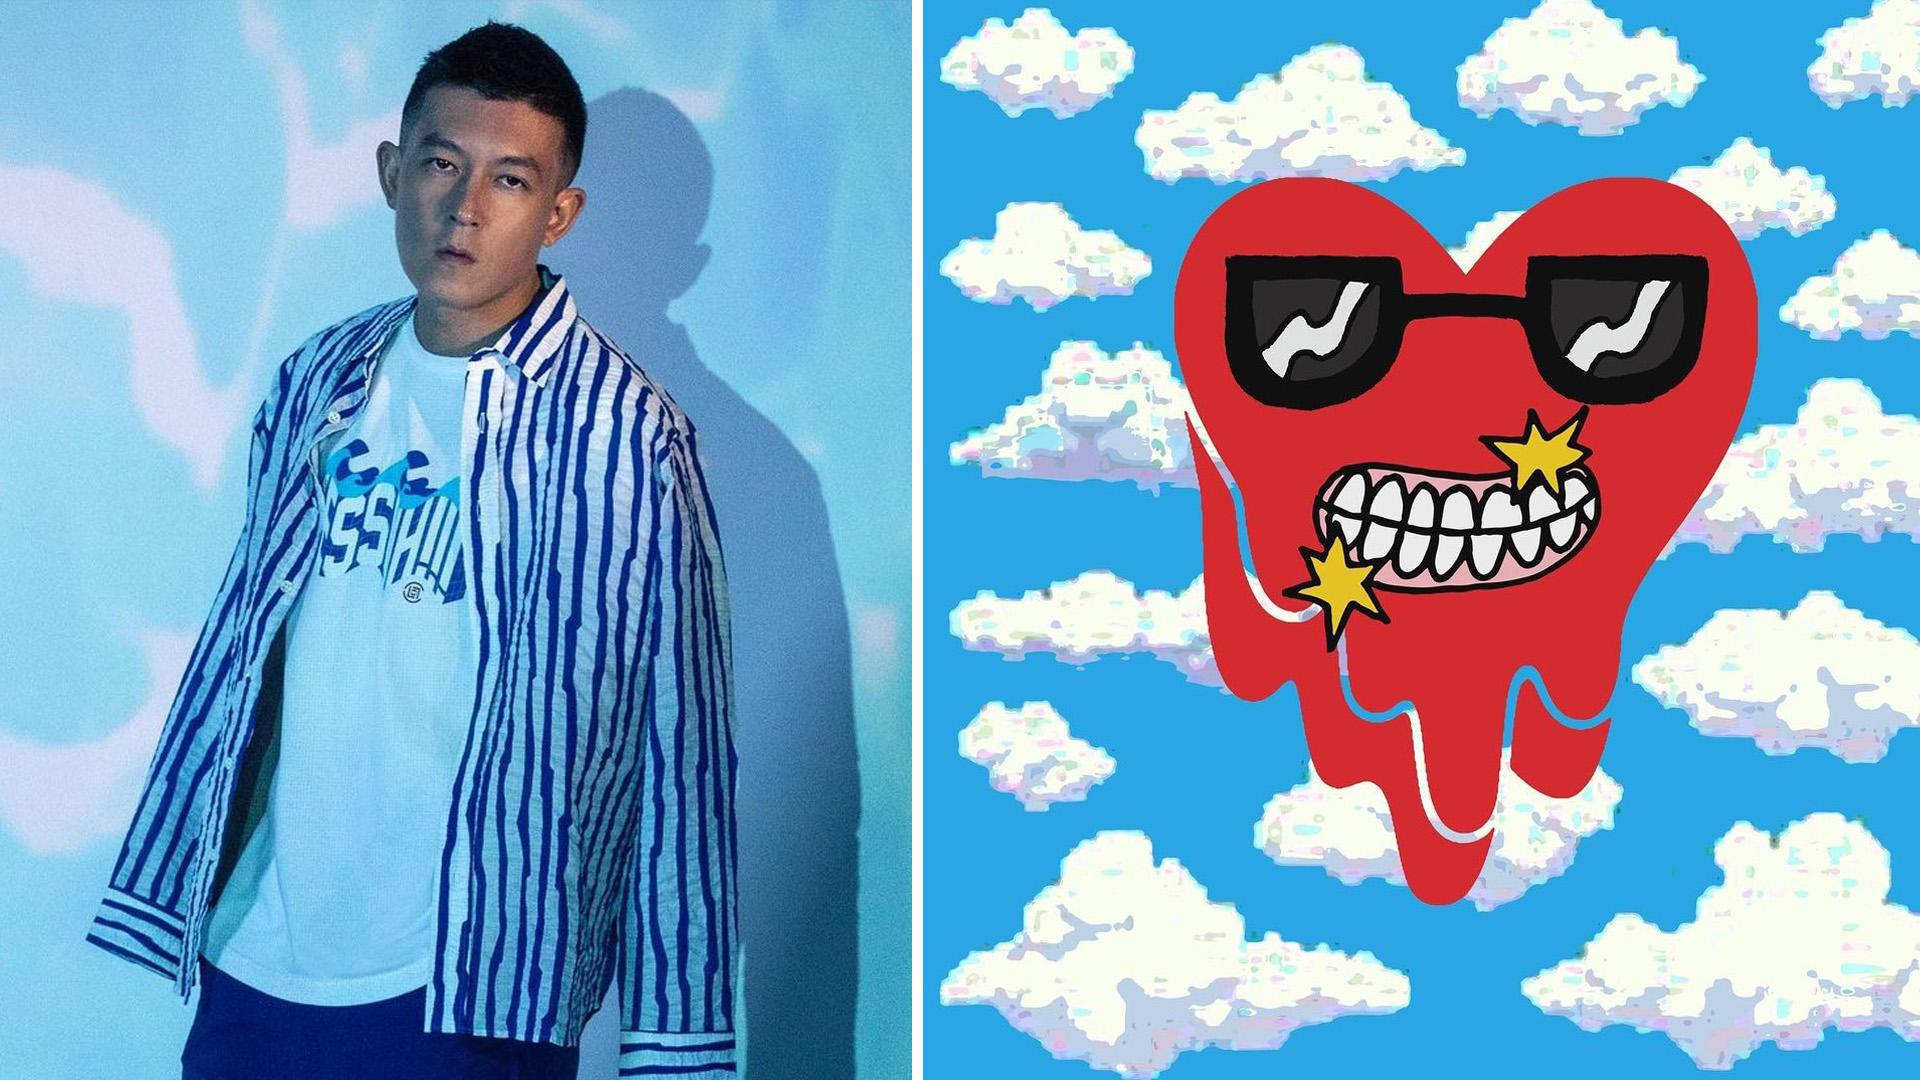 Edison Chen Estimated To Have Made A S$6.7Mil Profit In 3 Days From Selling NFTs